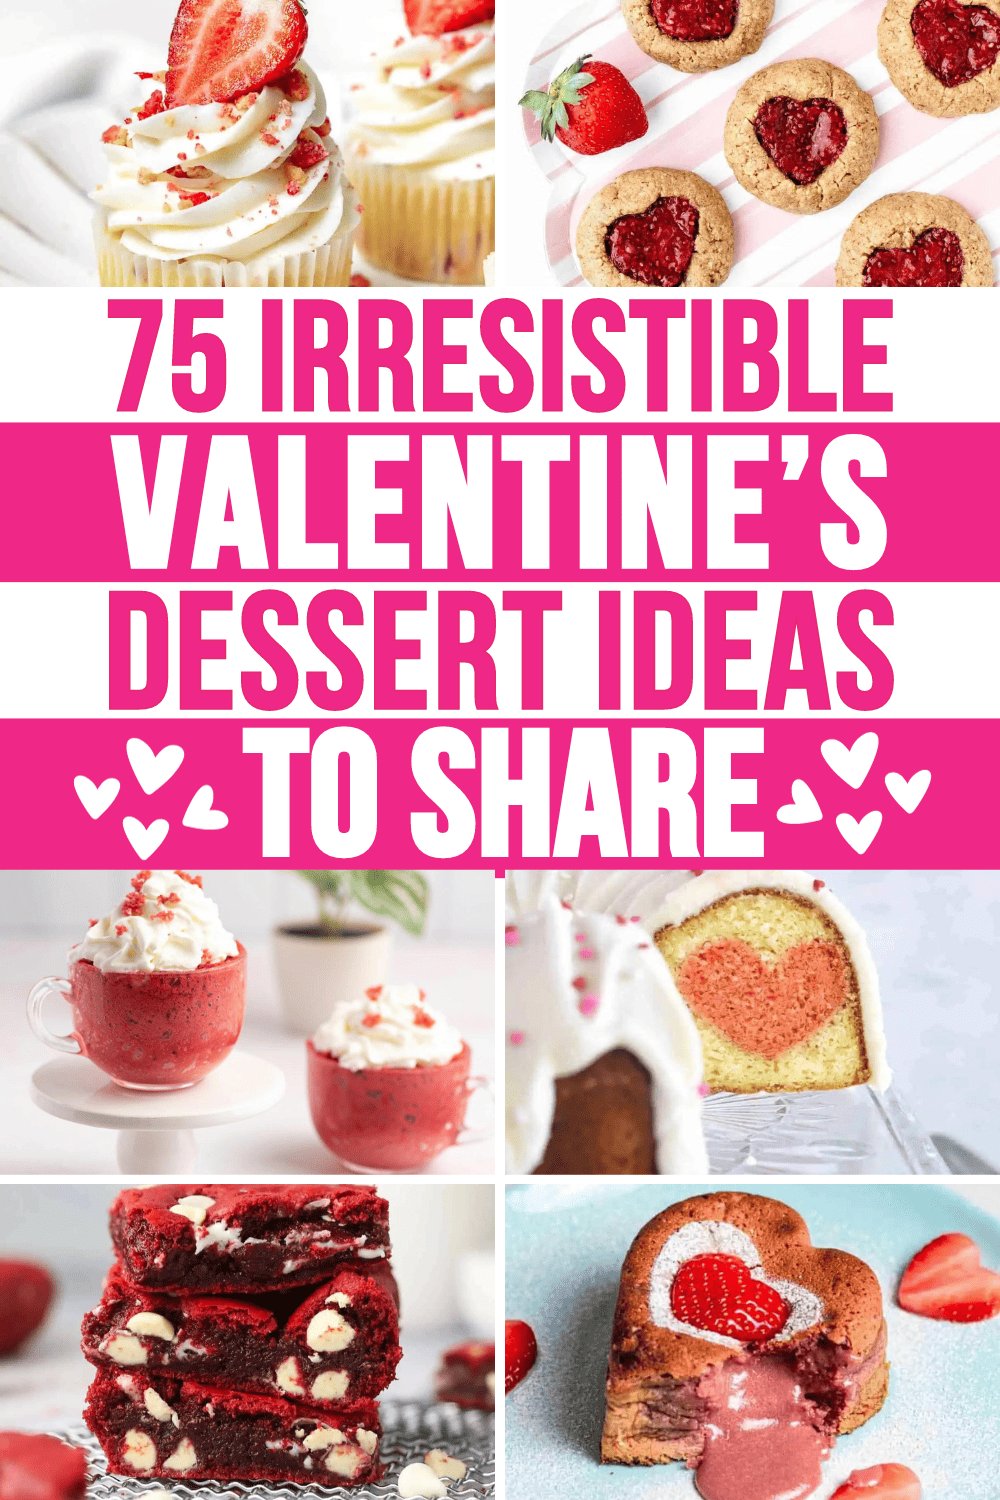 Valentines dessert ideas for a crowd! The best valentines dessert ideas fancy, valentine dessert ideas easy recipes, valentines baking ideas desserts, valentines day baking ideas desserts, valentines baking ideas desserts desserts, valentines day desserts easy simple, valentines bake sale ideas desserts, valentine sweets ideas dessert recipes, valentine food ideas desserts, valentine day dessert ideas easy recipes, san valentin desserts ideas, valentines dessert ideas for kids, valentine cookies